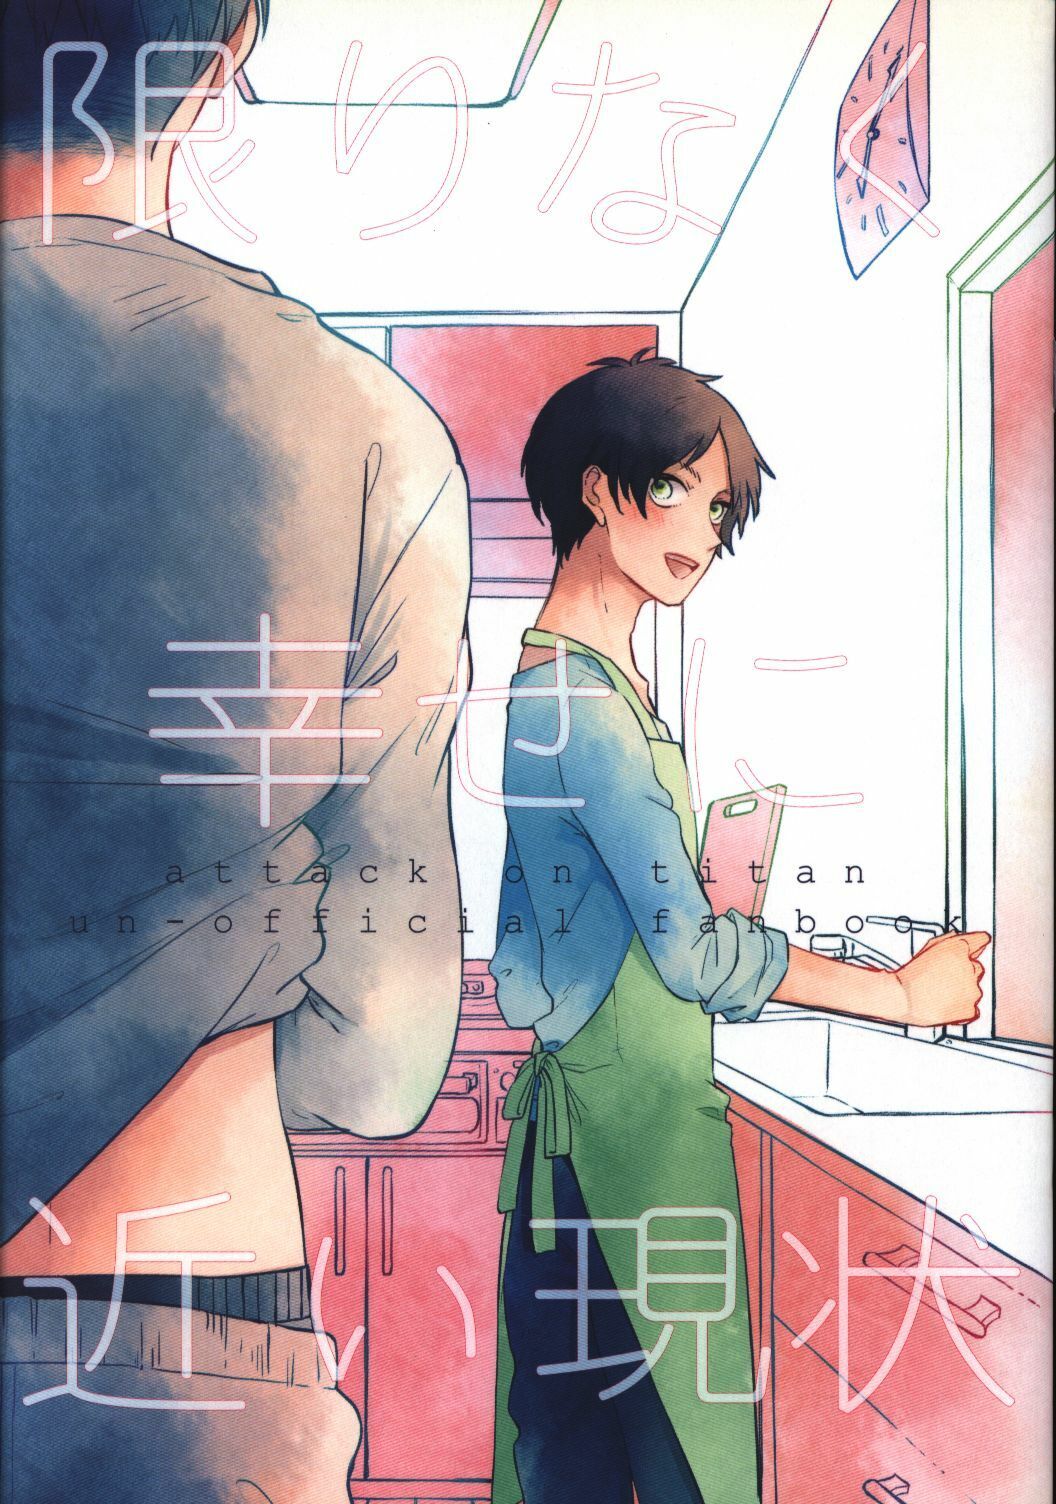 Doujinshi (Maico) The current situation is as close to happiness as possible...